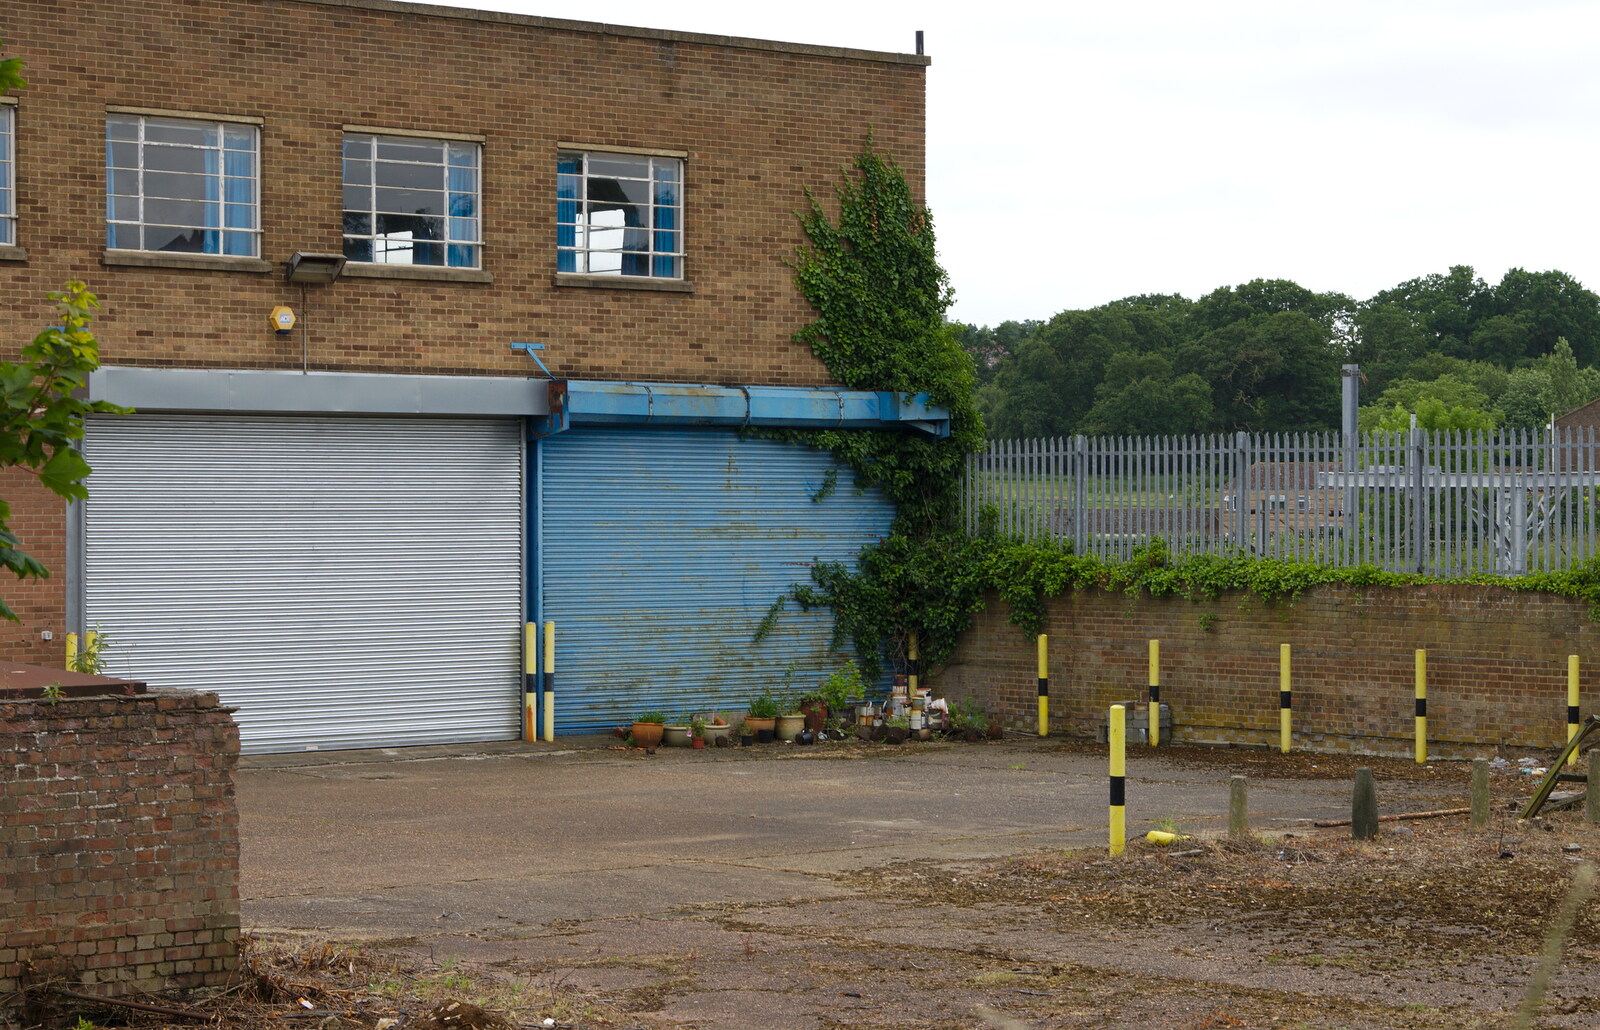 Derelict warehouse on Paul's Road, off London Road from Isobel's Race For Life, Chantry Park, Ipswich - 11th June 2014